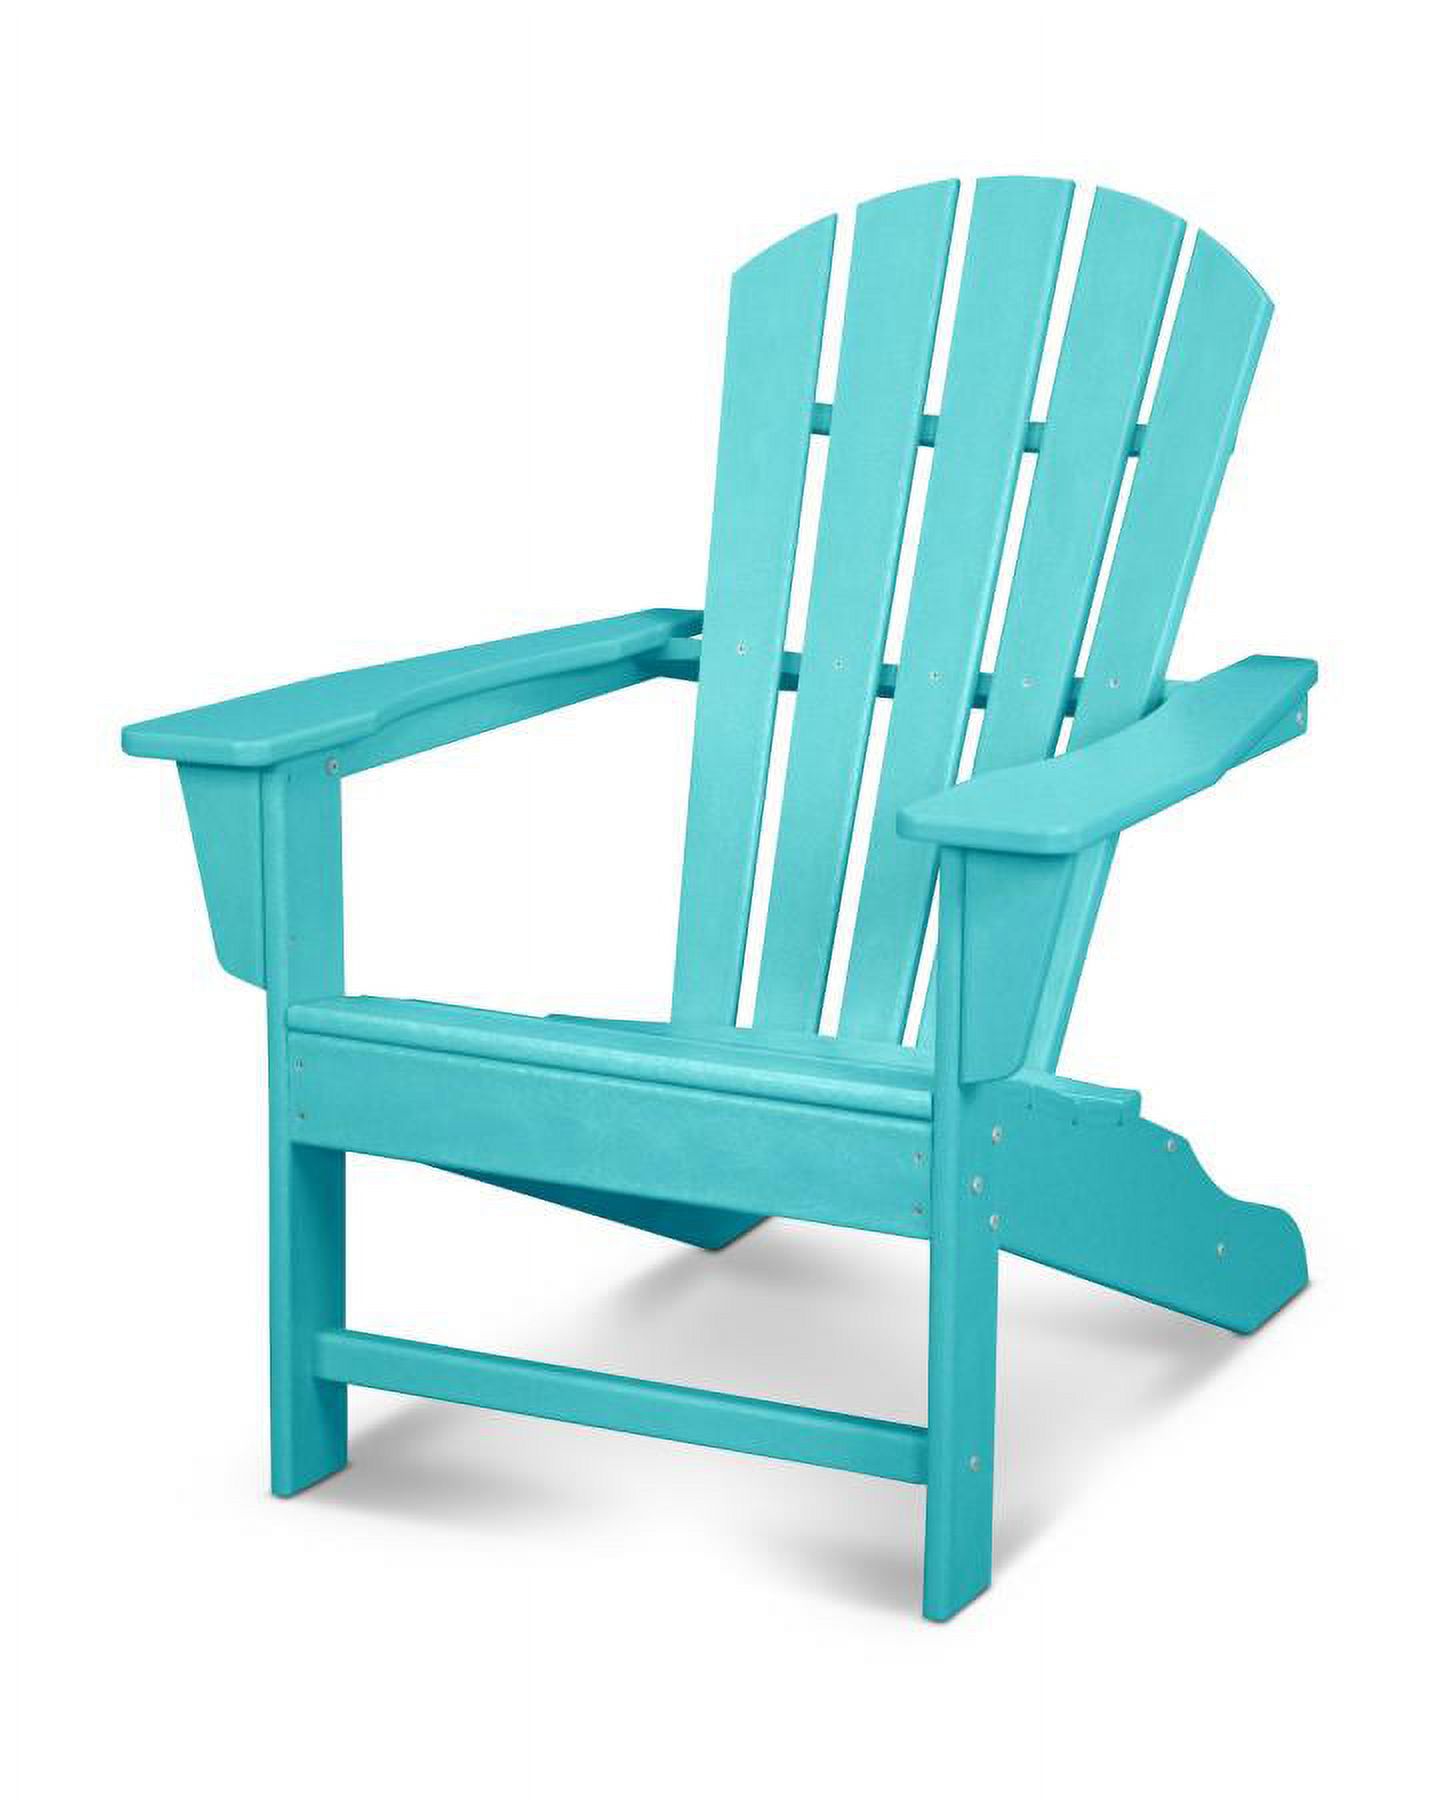 Better Homes & Gardens Turq Faux Wood Lakeport Adirondack Chair - image 2 of 2